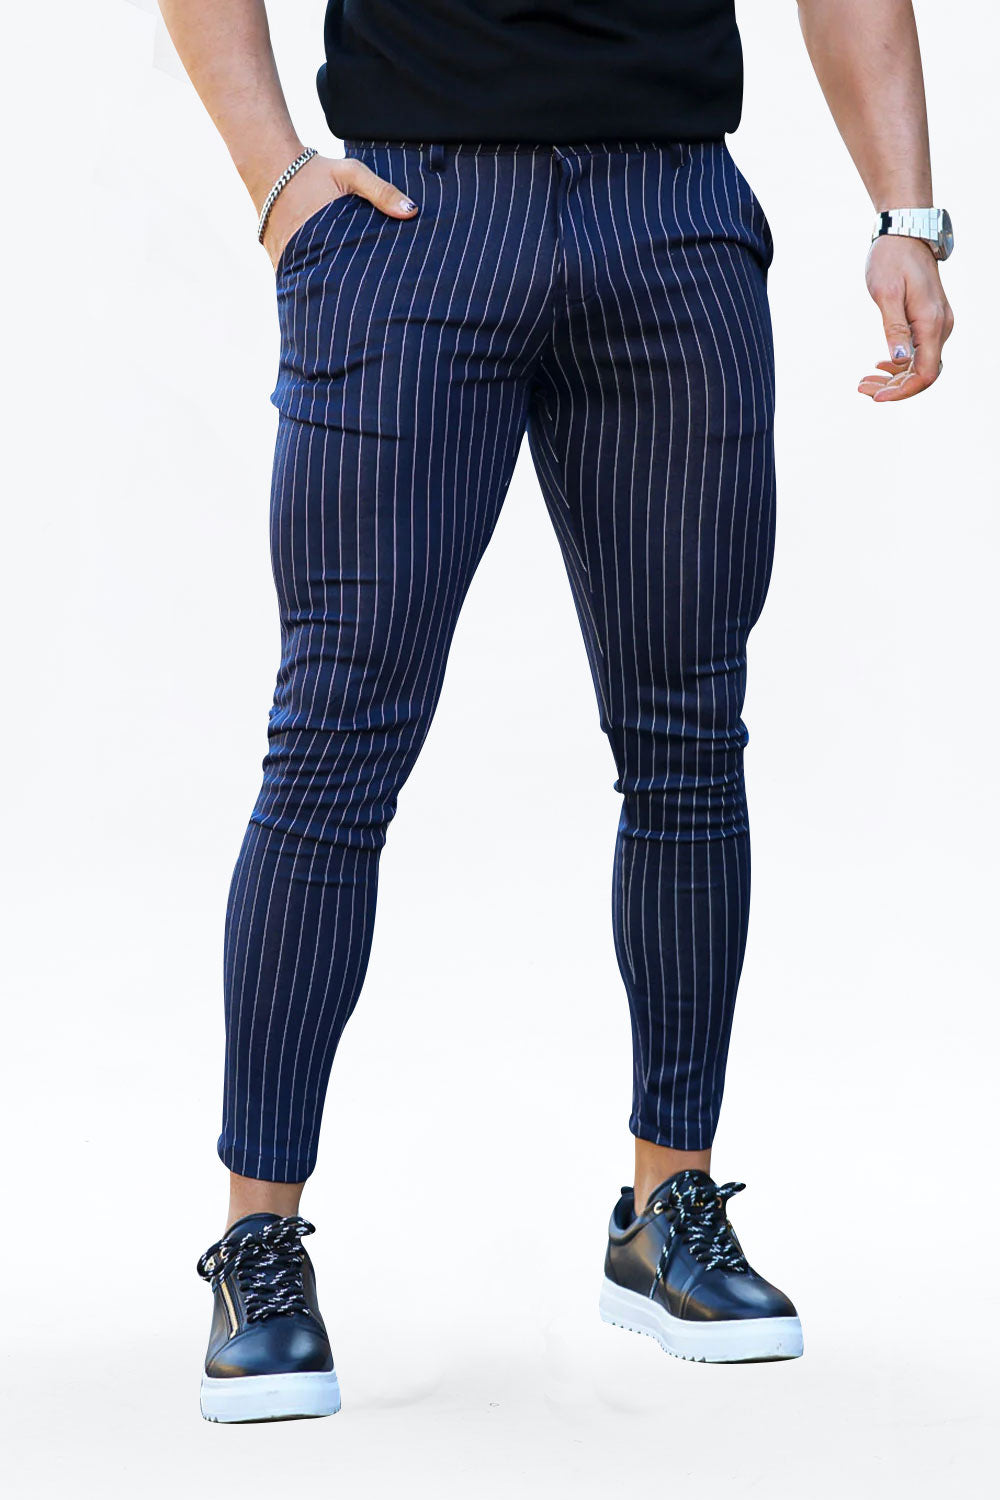 blue striped trousers